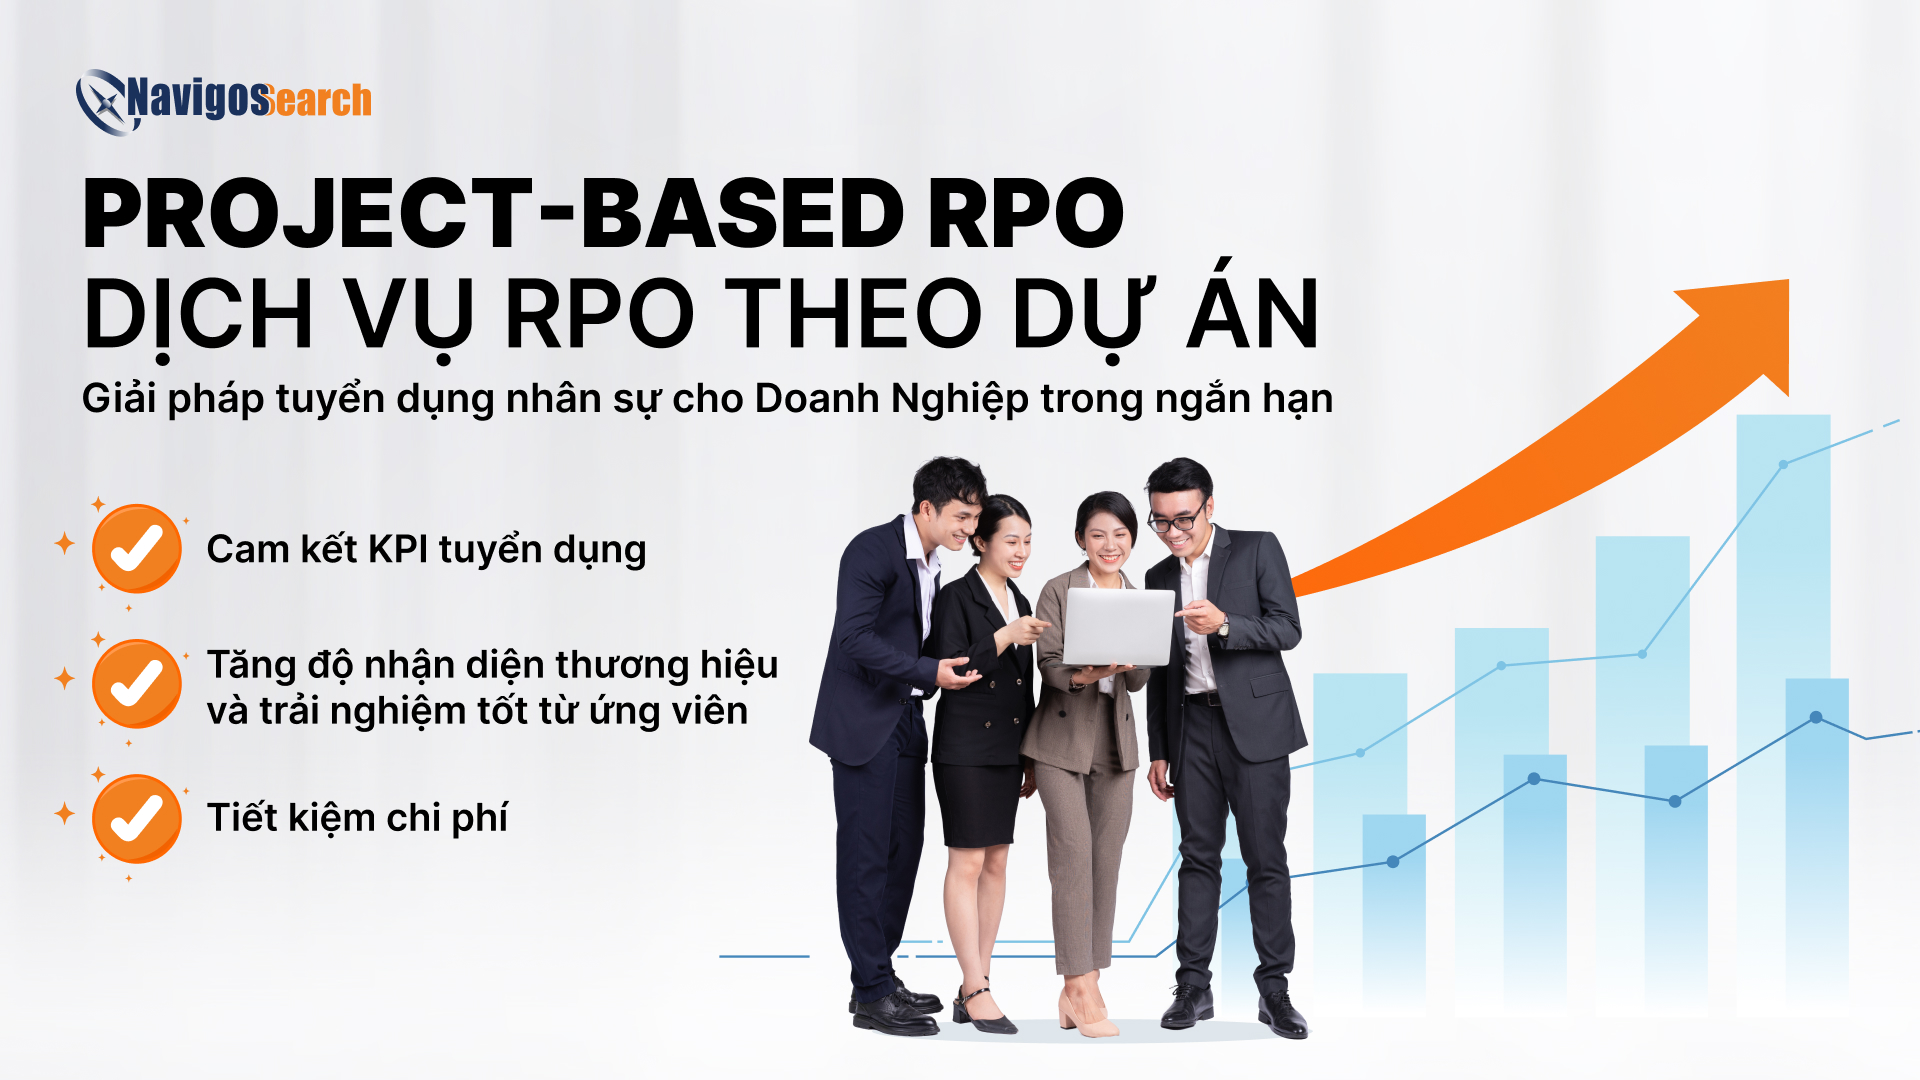 PROJECT-BASED RPO